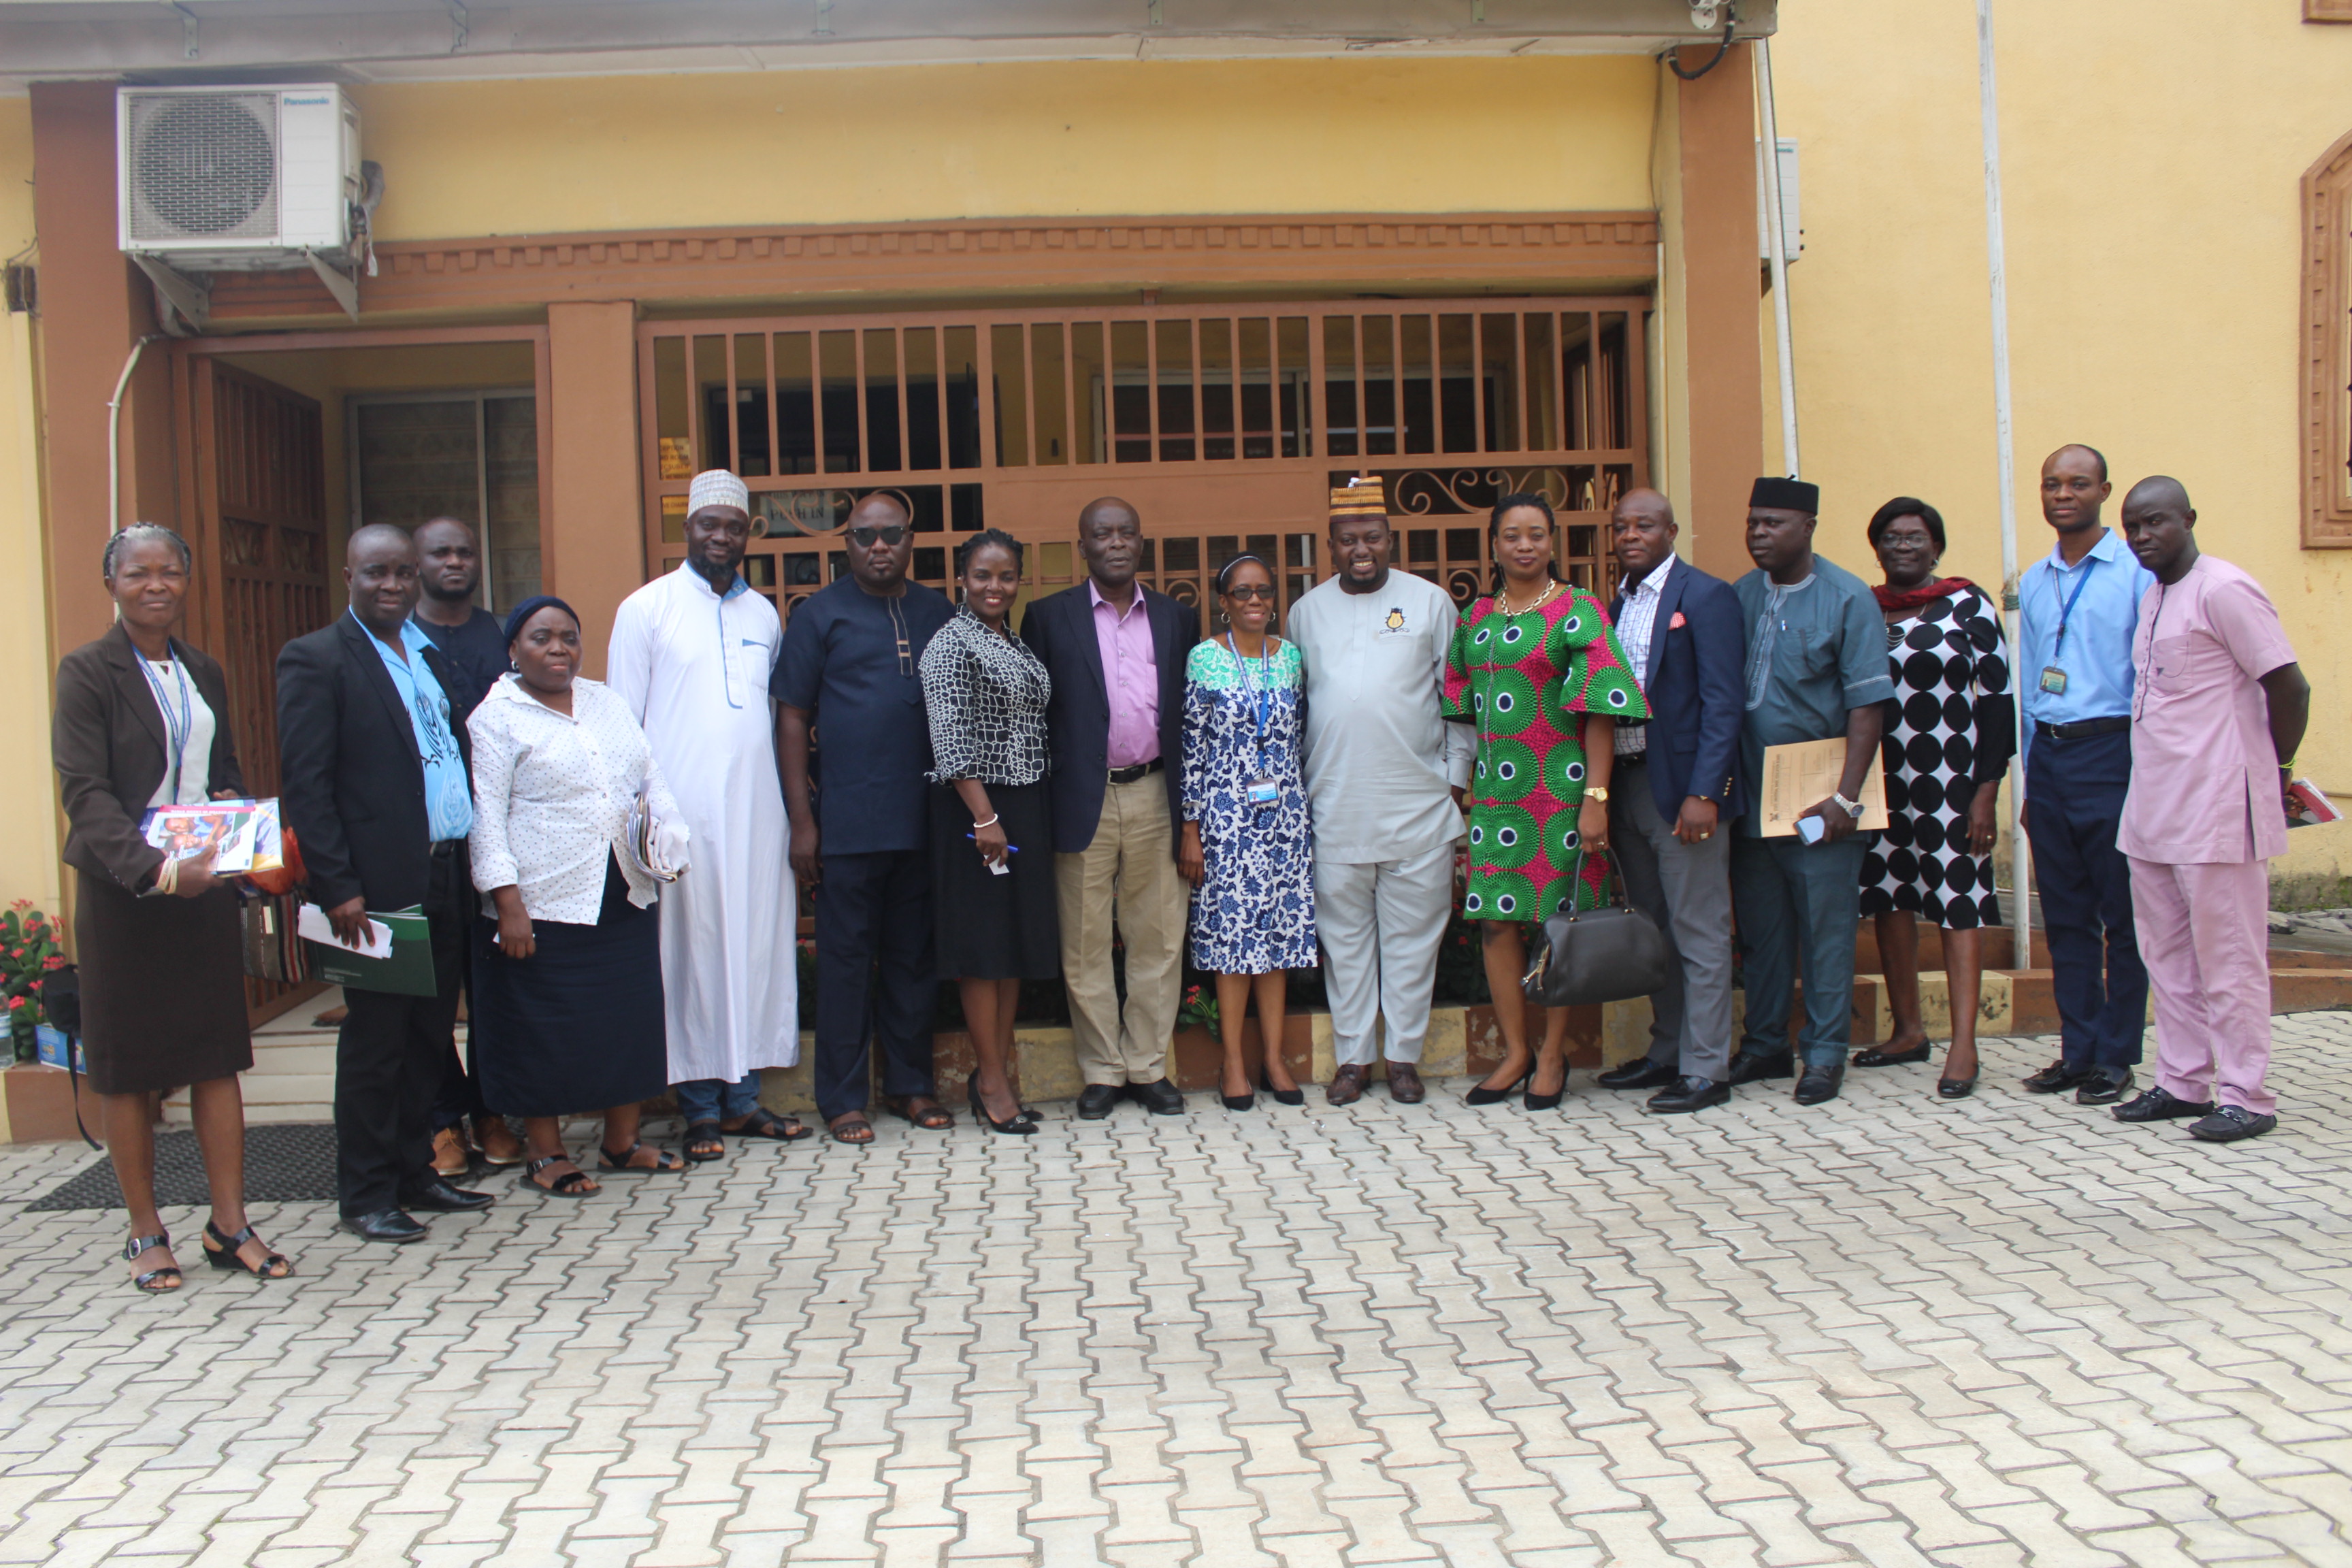 HDI and Other Education Stakeholders Paid an Advocacy Visit to the Newly Appointed Board Members of Lagos SUBEB